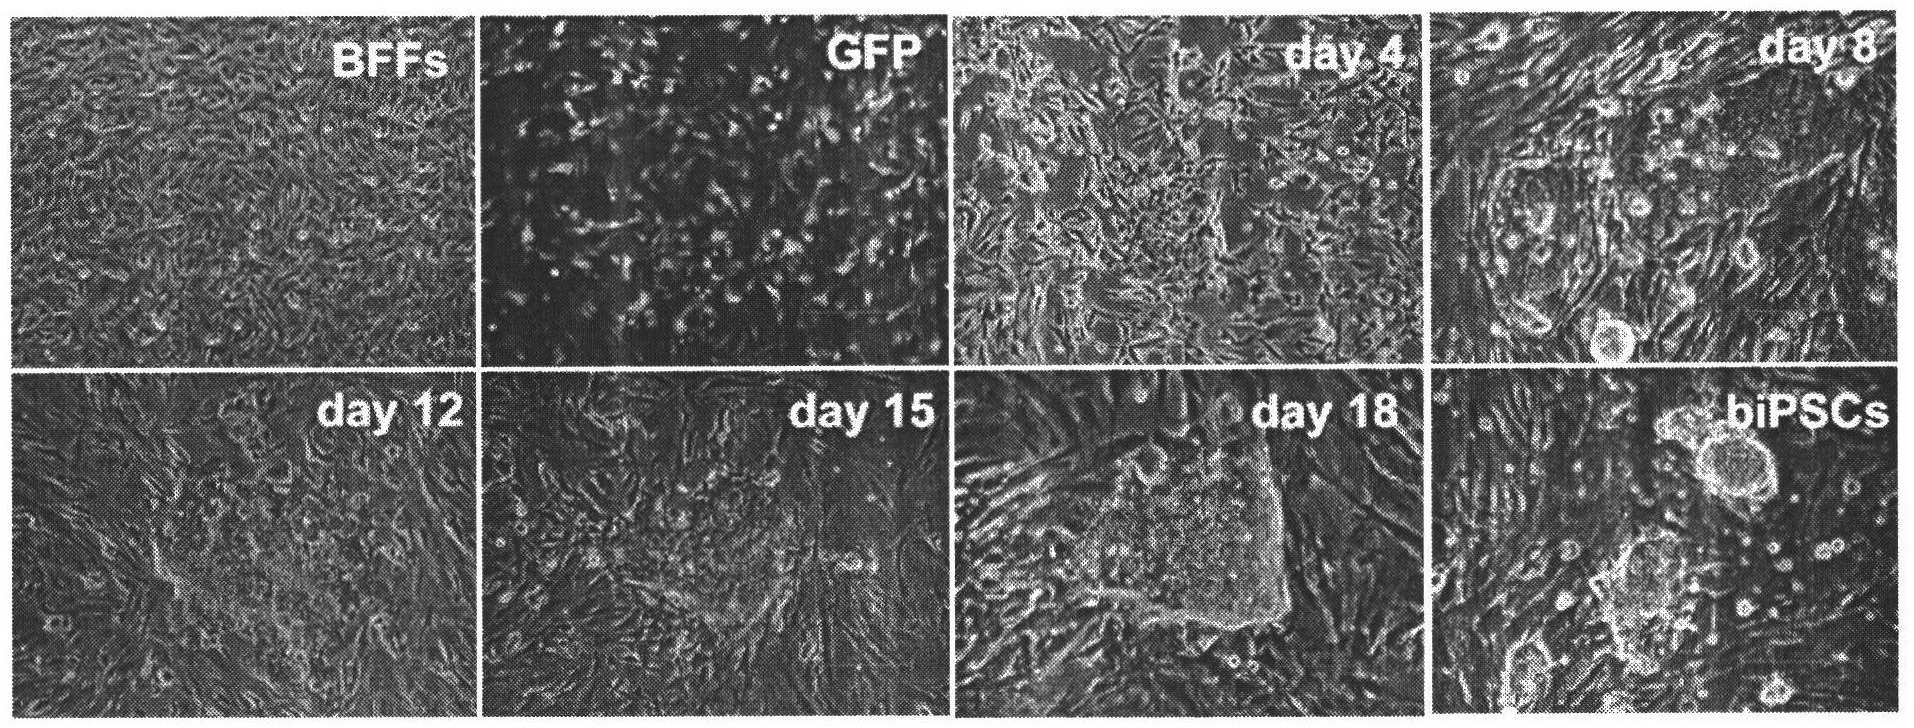 Production method for buffalo induced pluripotent stem cells